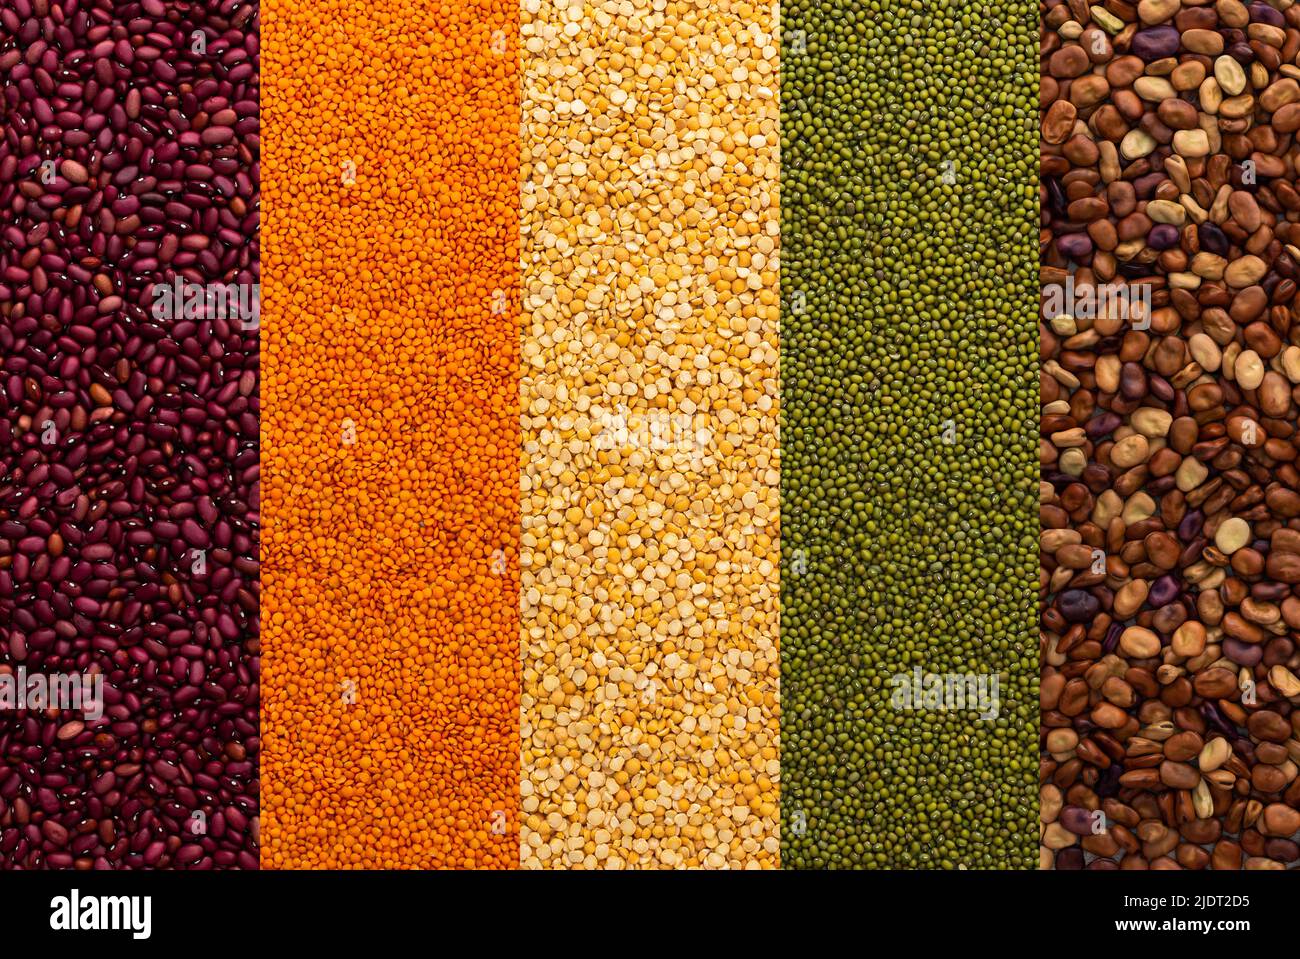 Different types of legumes, yellow peas and lentils and mung beans, red and brown beans, top view Stock Photo